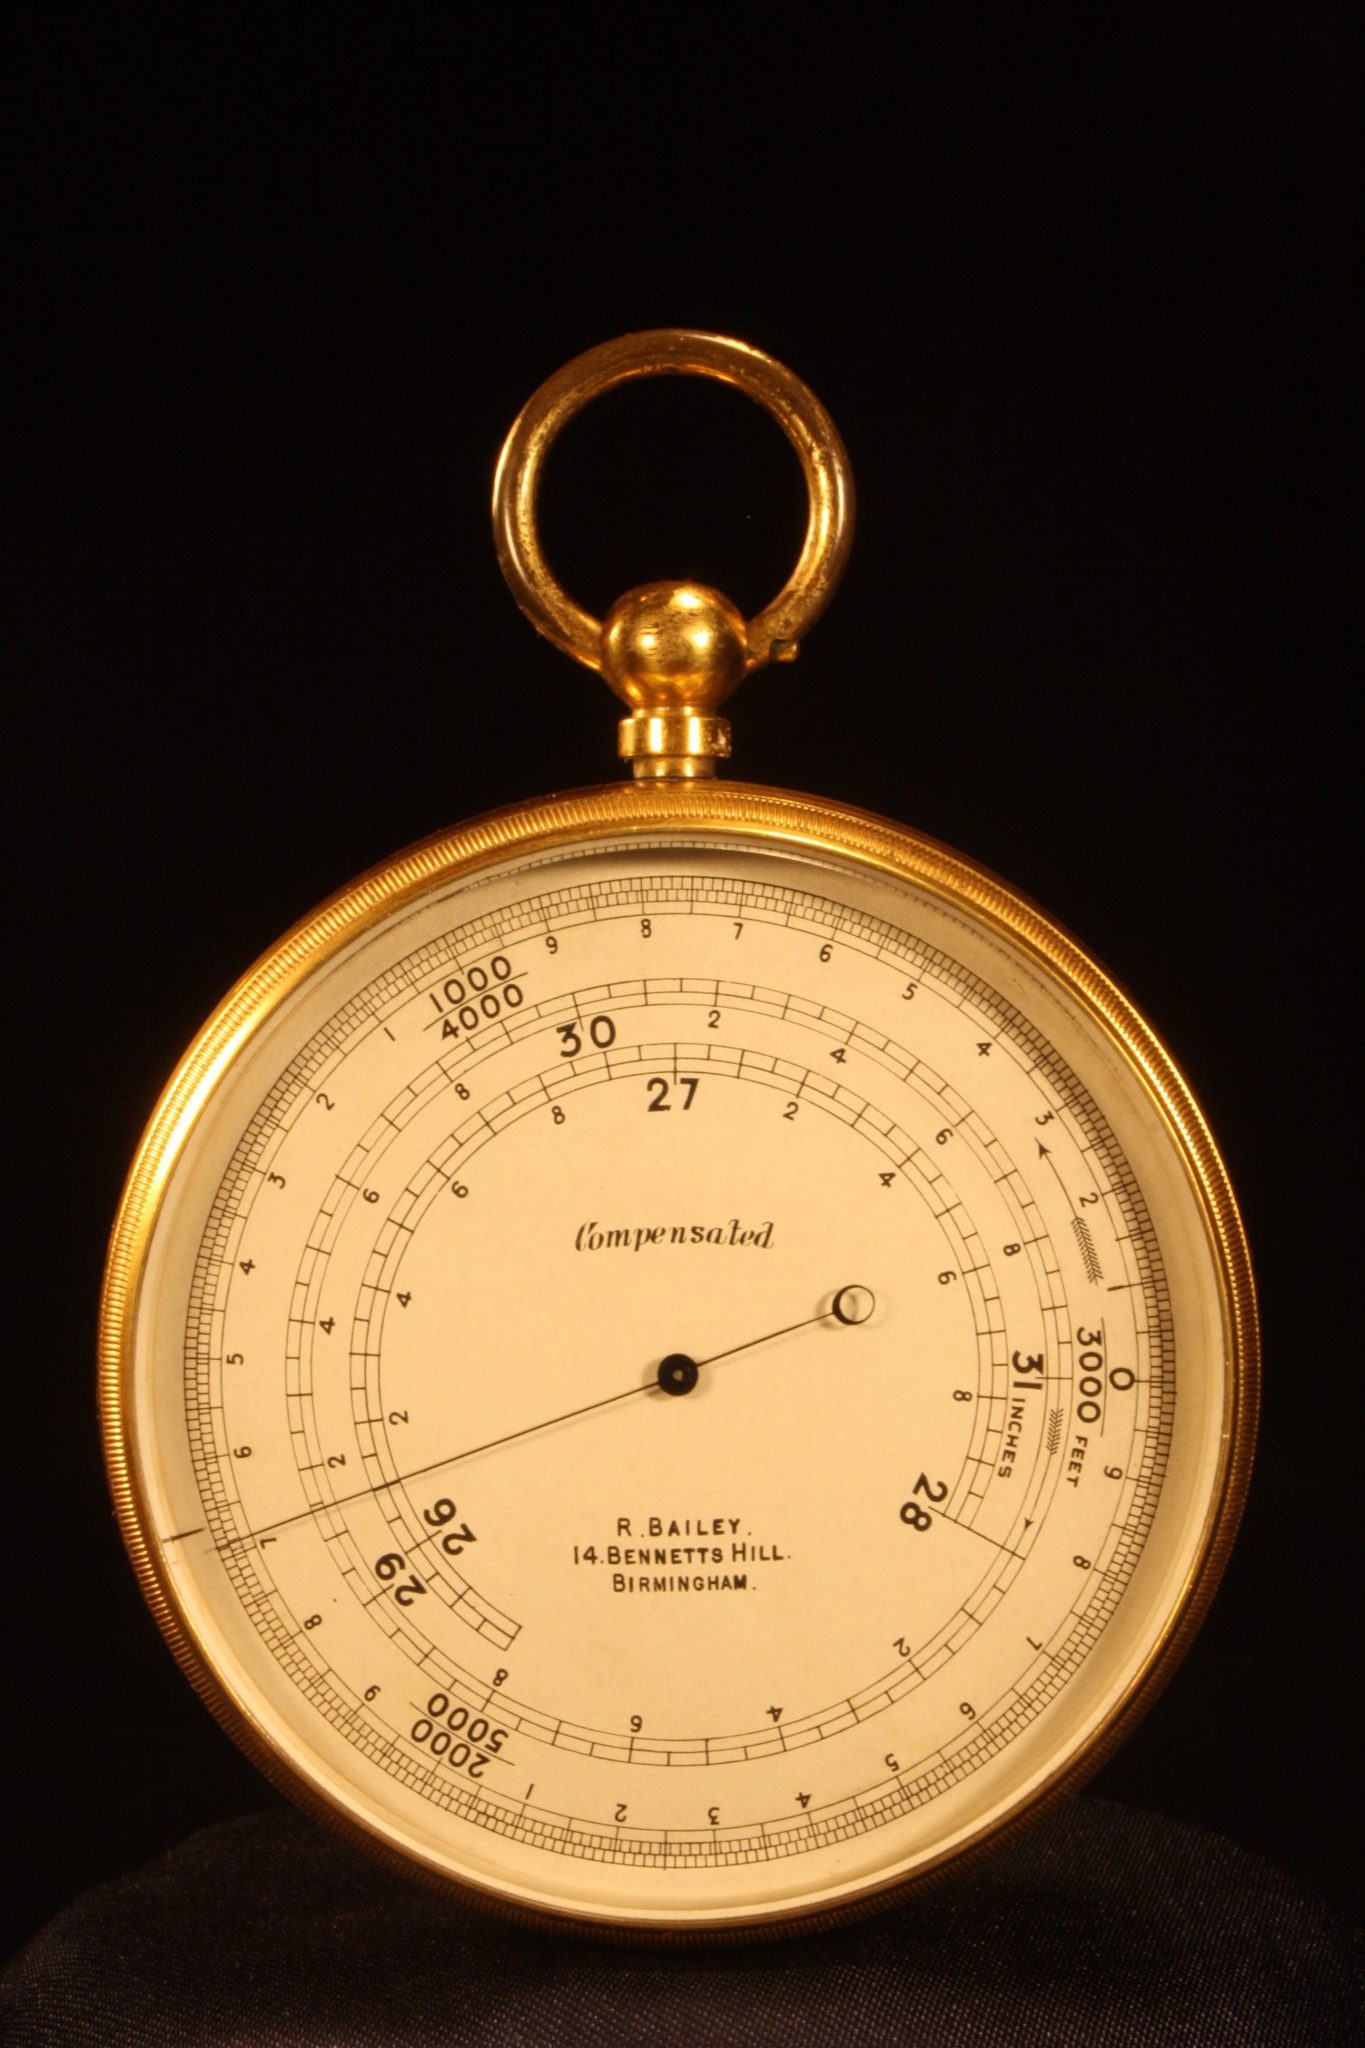 Image of Pocket Altimeter by Short & Mason, Retailed by Bailey c1909